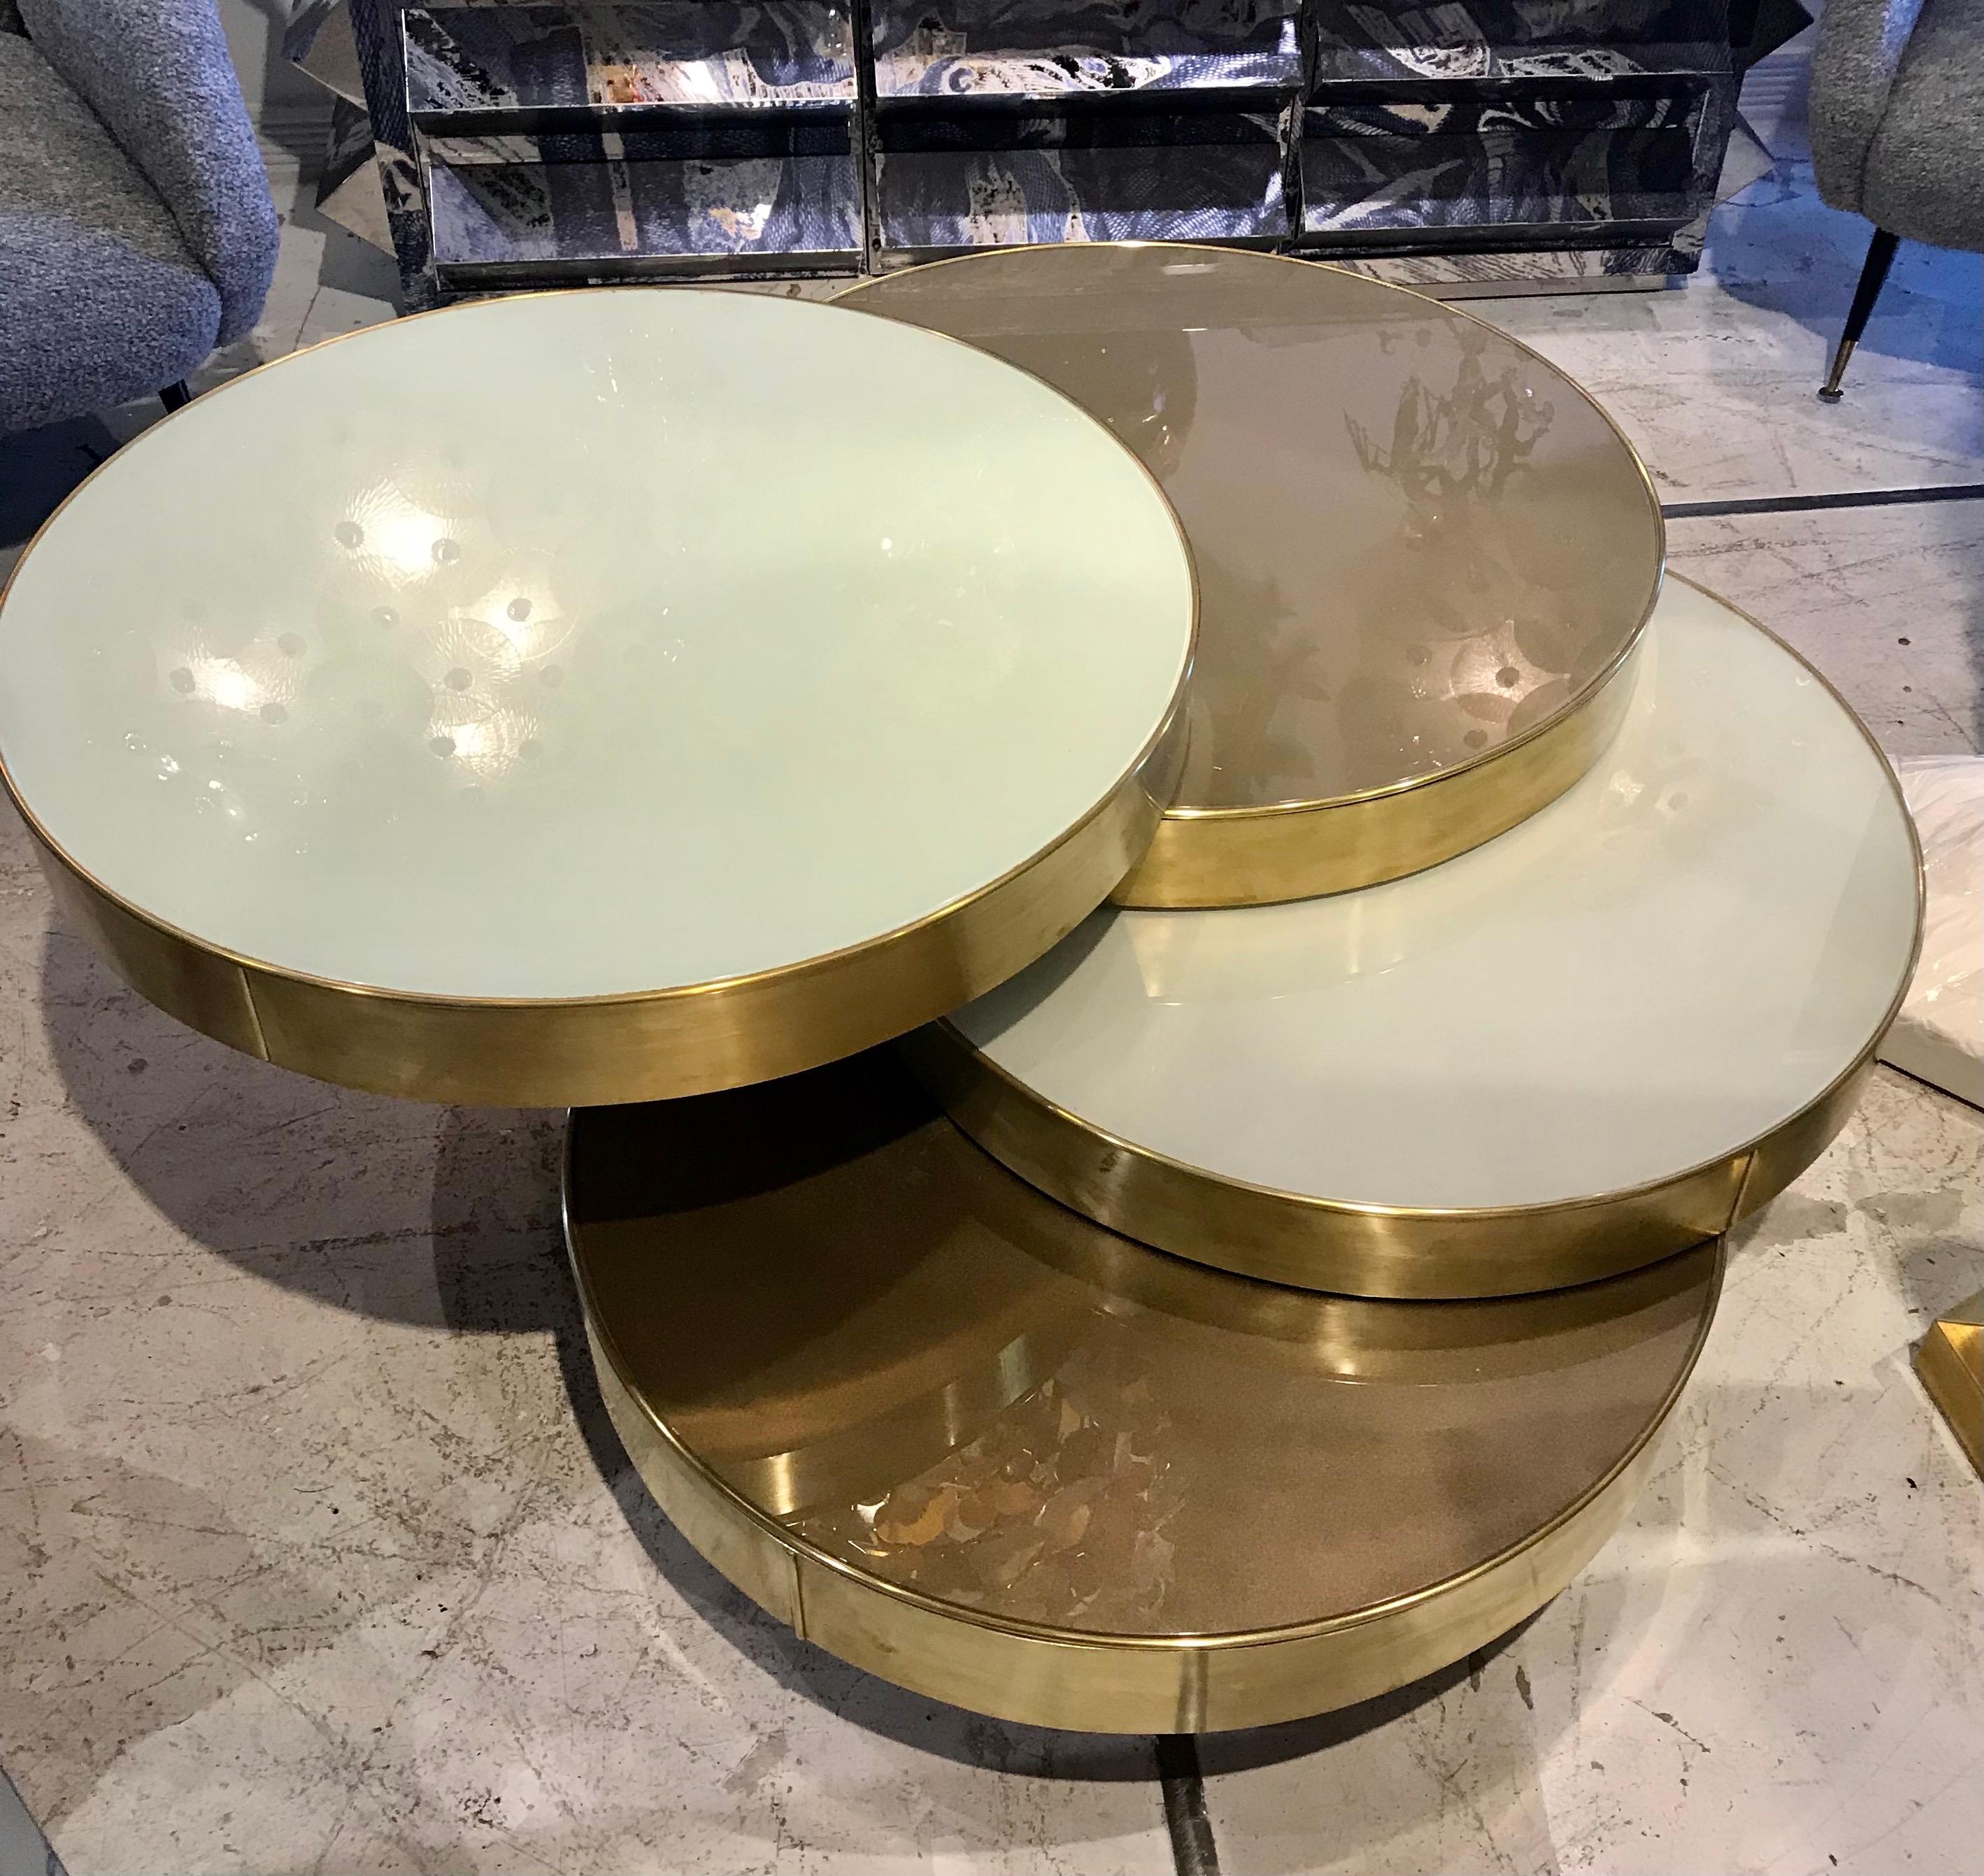 Four layers of reverse painted glass with brass trim roll open to form table tops at different heights and colors. The table fully opens to 60 inches.